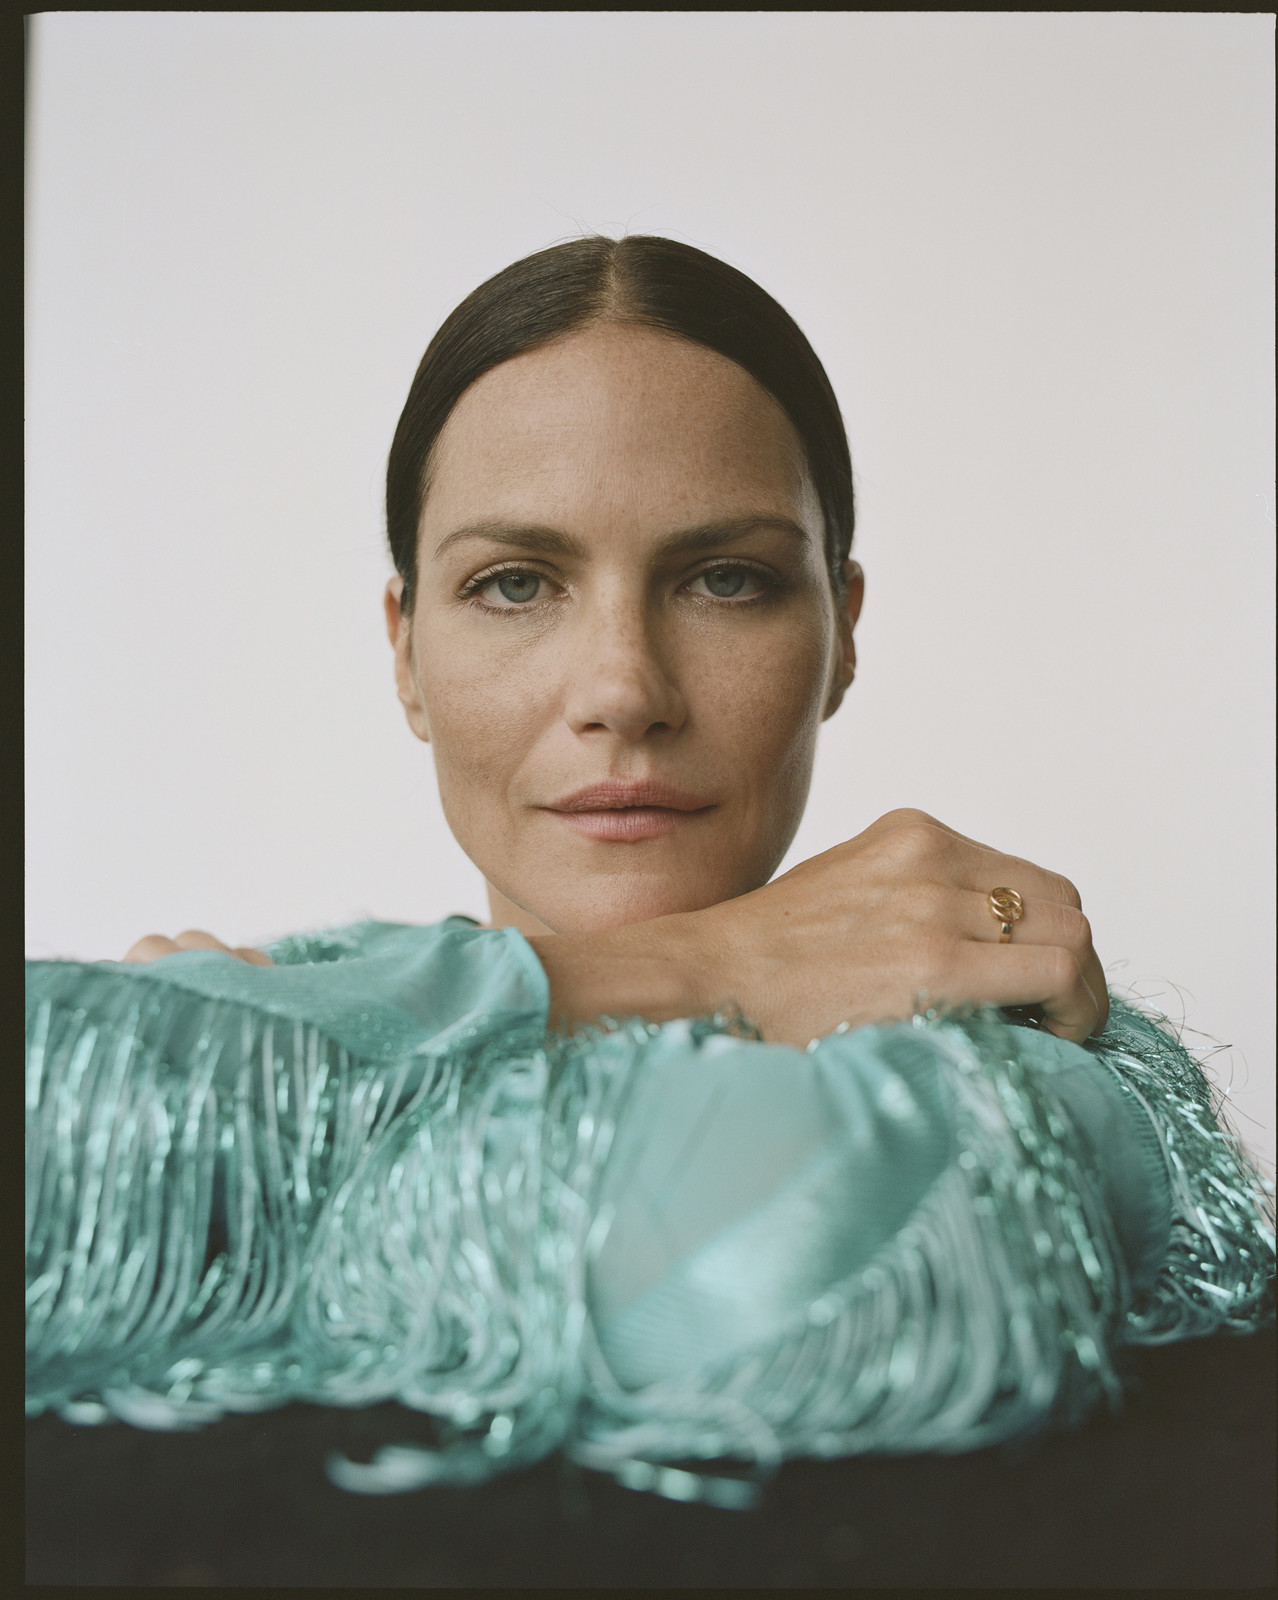 ISSUE 16 FEATURING MISSY RAYDER - Love Want Magazine